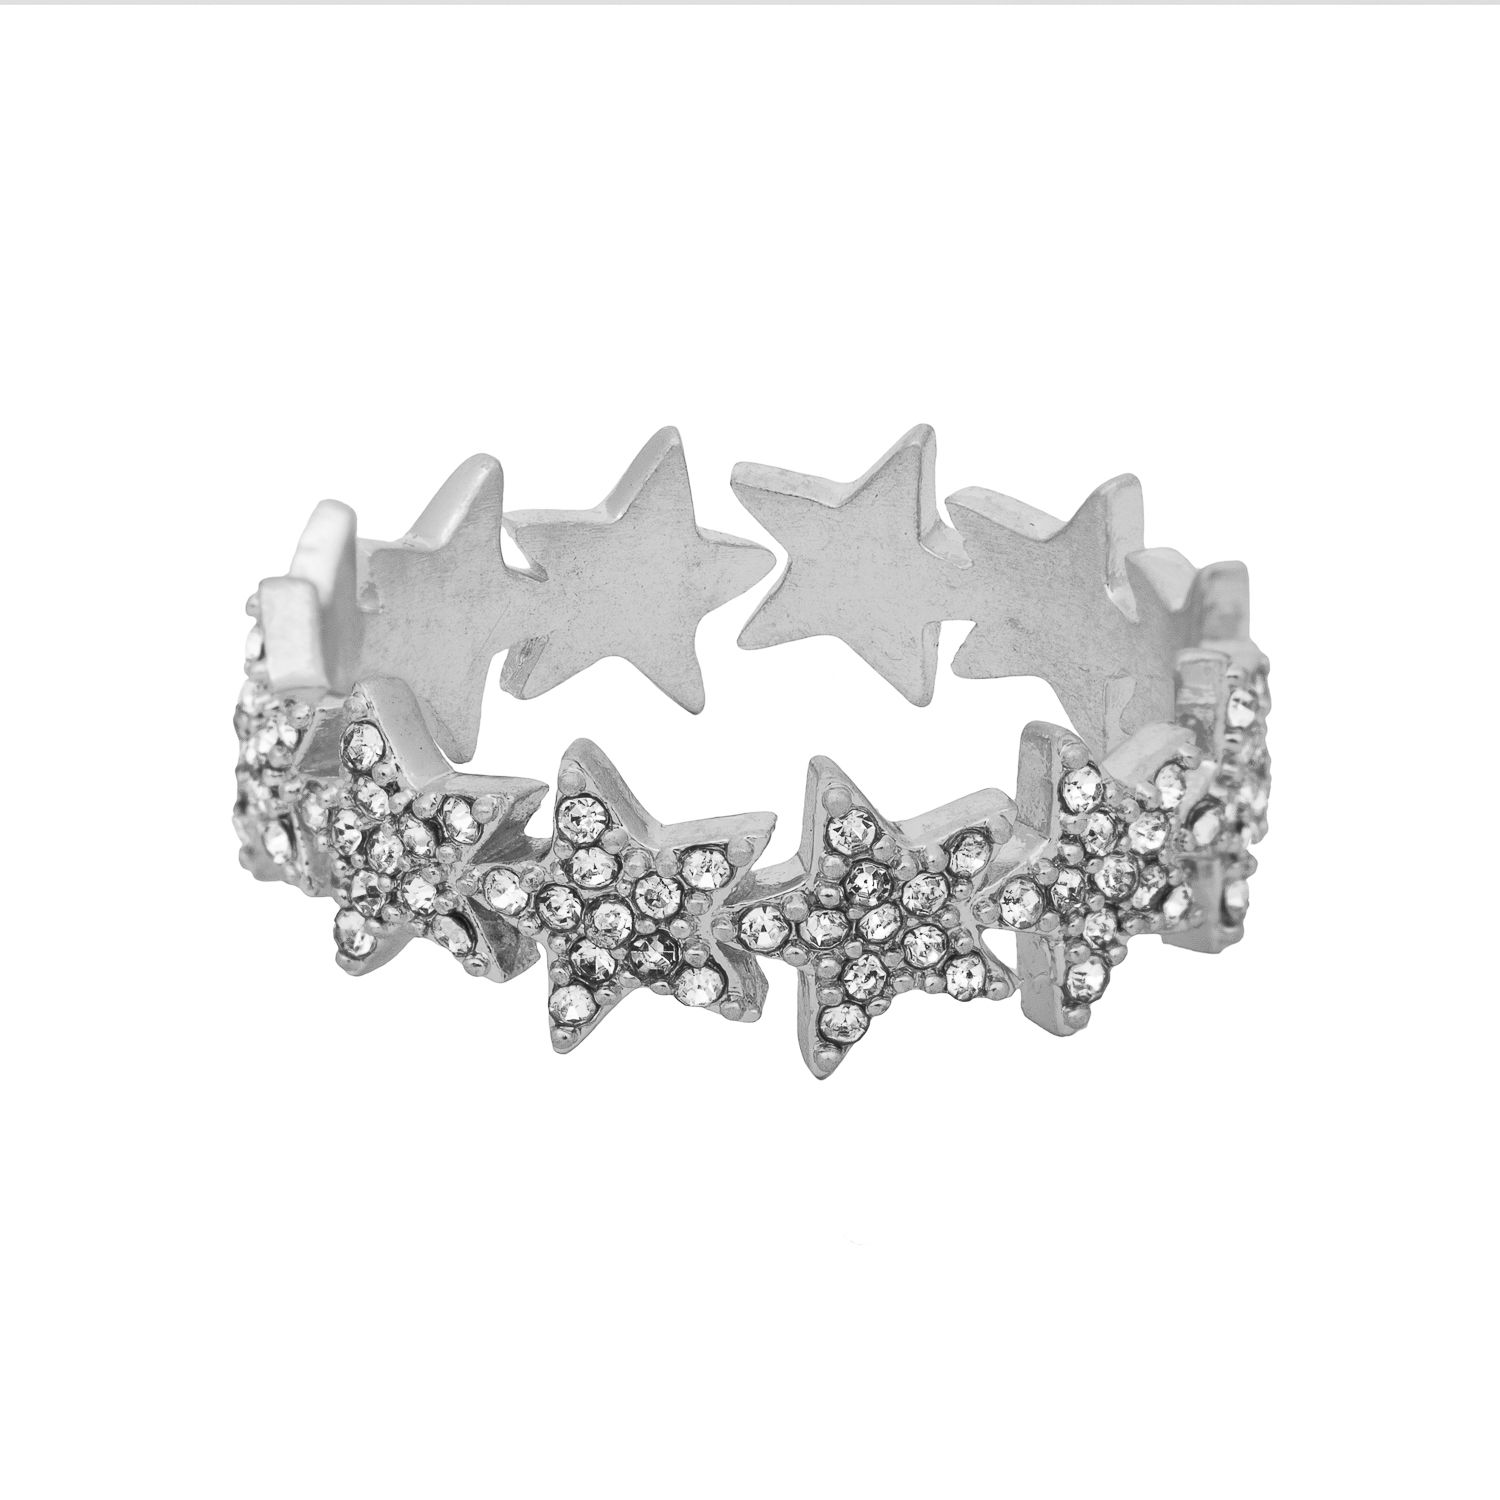 Our silver plated Kate Thornton sparkling star ring will add glamour and sparkle to your style whether for a special occasion or just because. This classic piece can be worn with any outfit, from jeans and a t-shirt to your favourite party dress. So whether you want it for a special occasion or just because, our sparkly star ring is sure to do you proud. The silver tone adjustable ring is 18mm in diameter but can be gently adjusted to change size.  Presented in a KTx jewellery pouch to keep your jewellery safe or ideal for gifting!